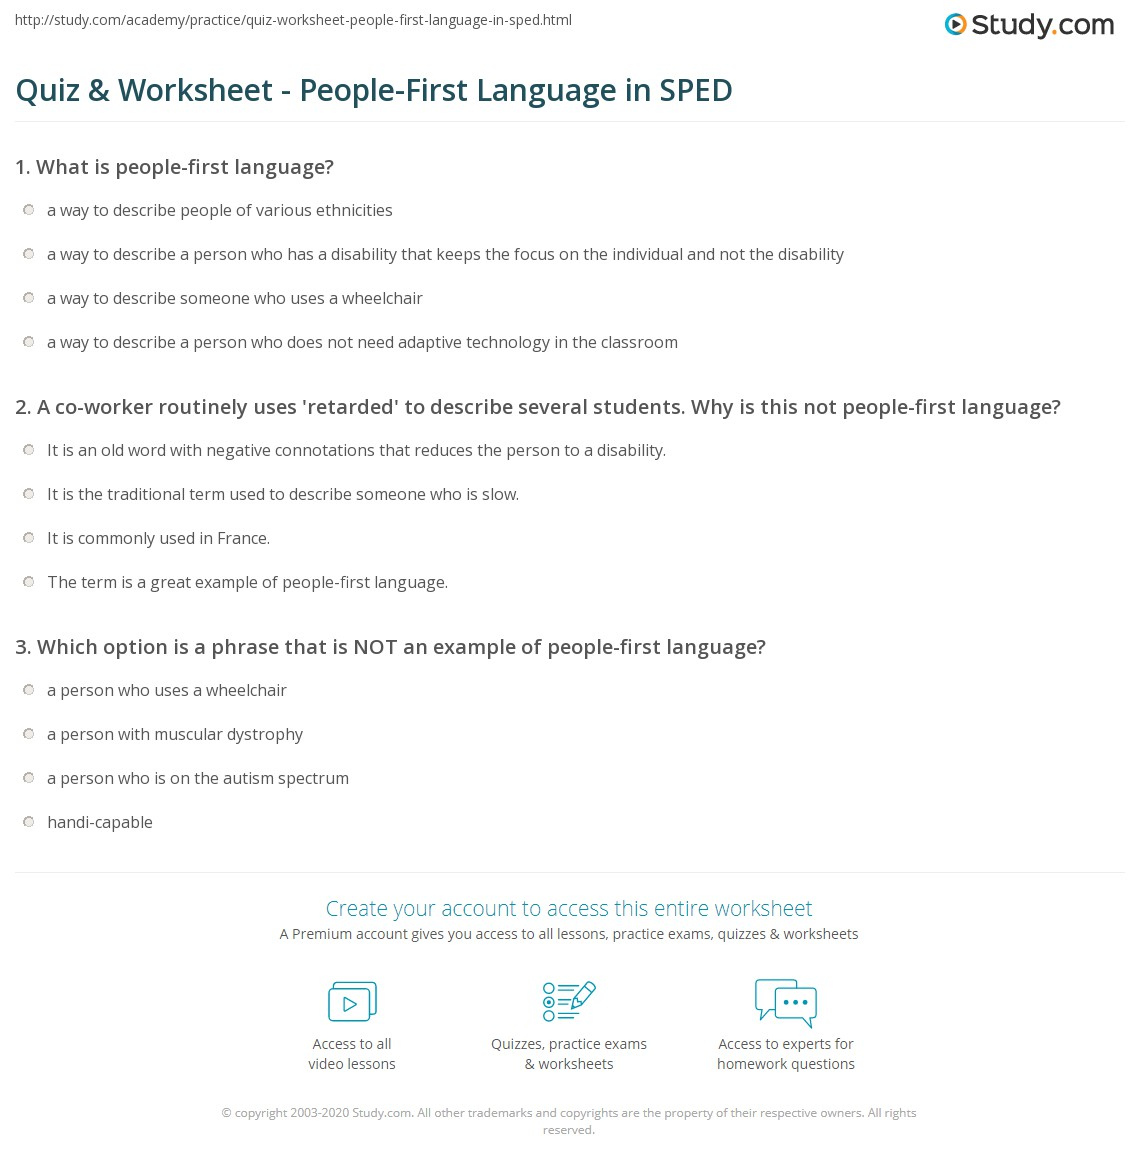 Quiz Worksheet People First Language In SPED Study